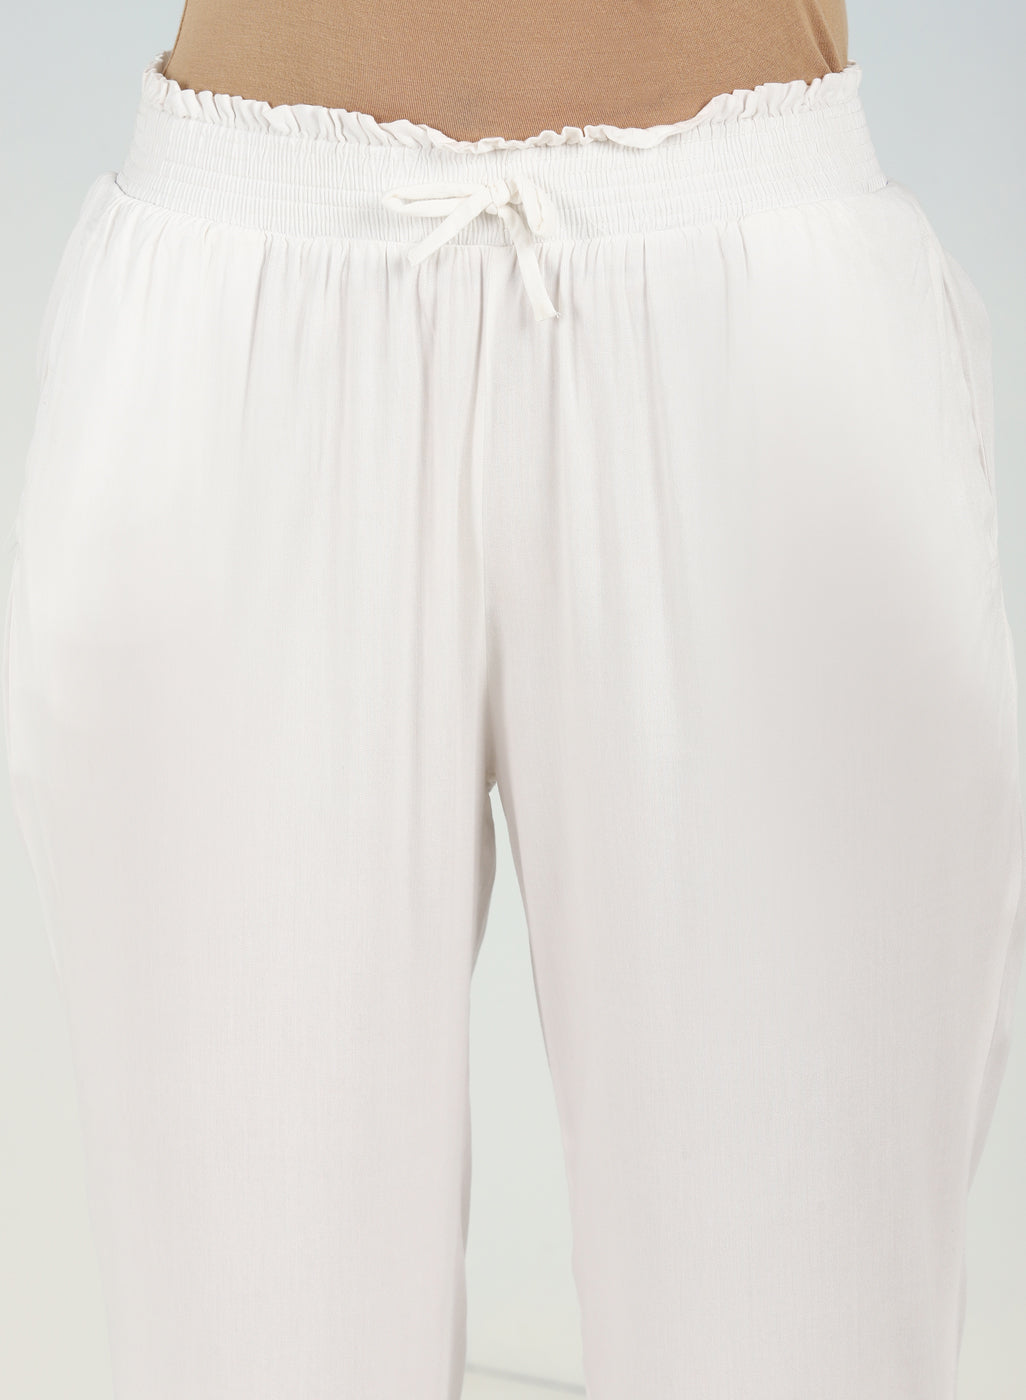 Ivory Ankle-length Pants for Women with drawstring Waist and Lace Work on the Hem